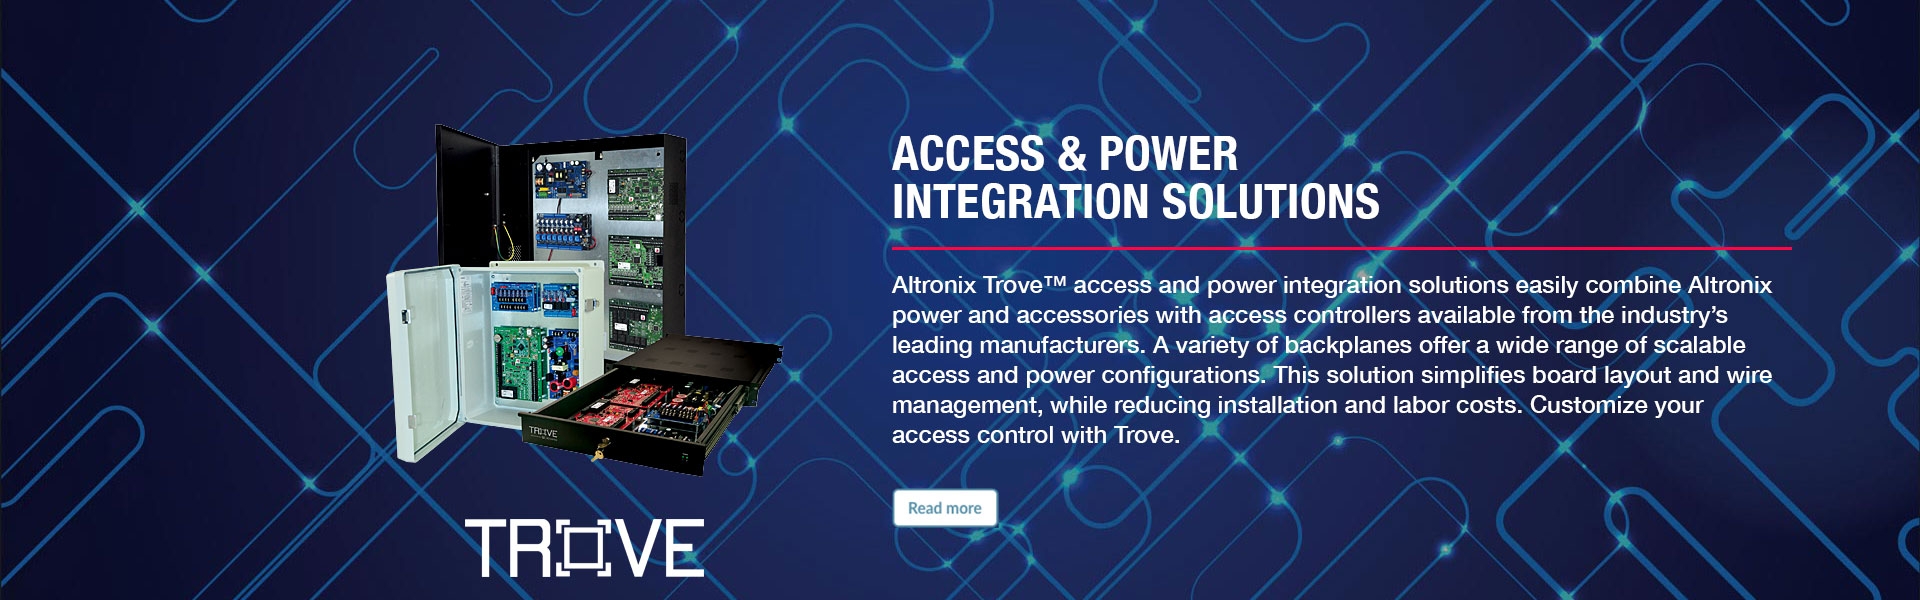 Altronix Home Page